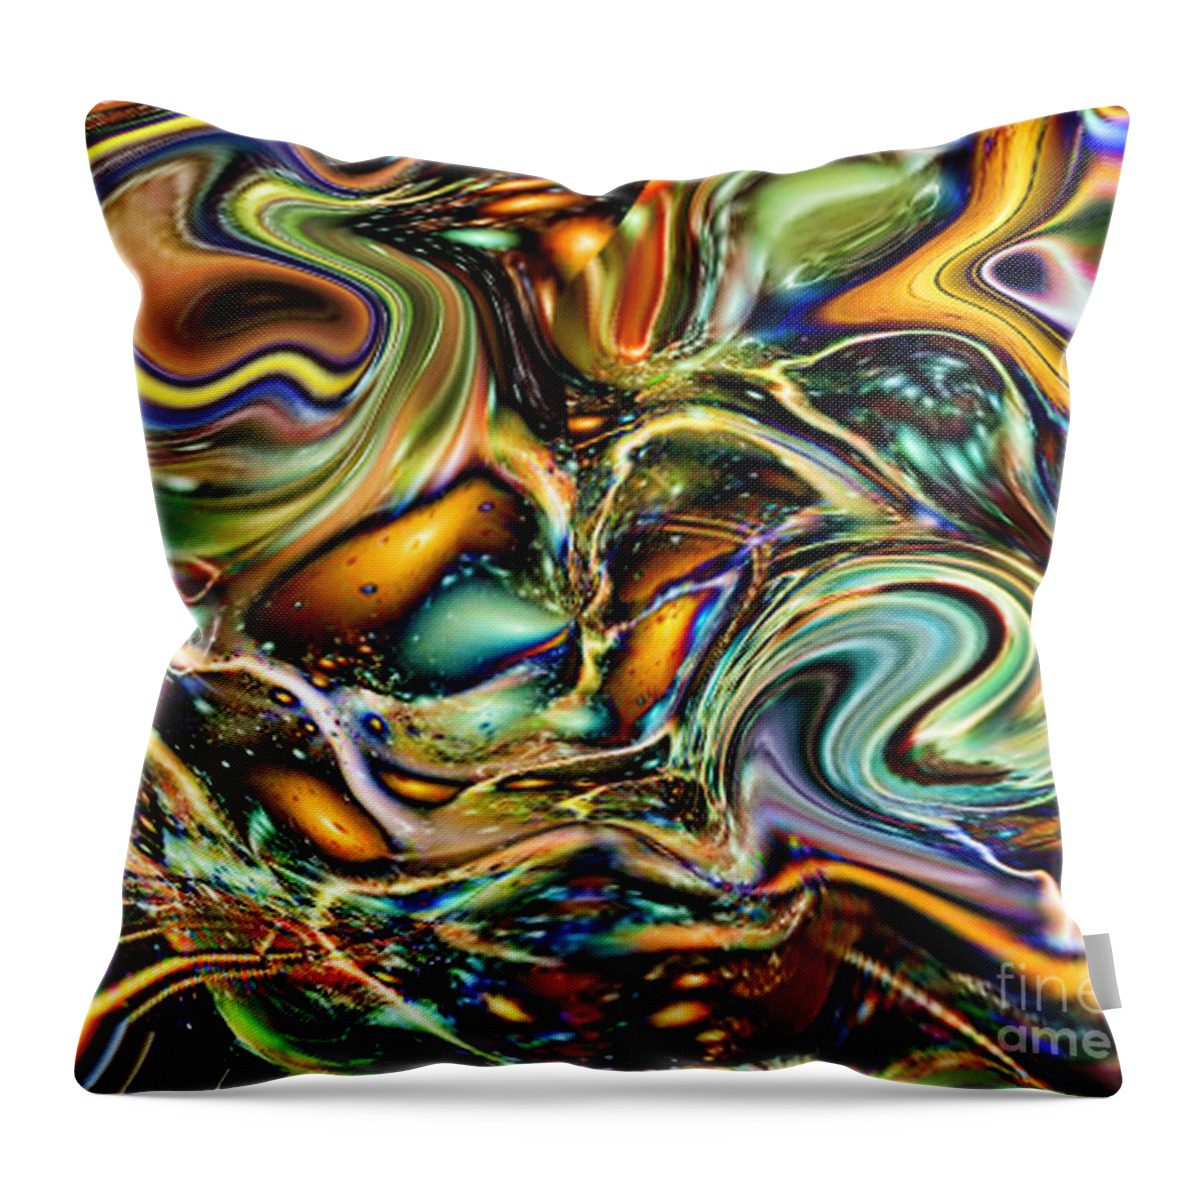 Motion Throw Pillow featuring the digital art Commotion in the Motion VII by Jim Fitzpatrick